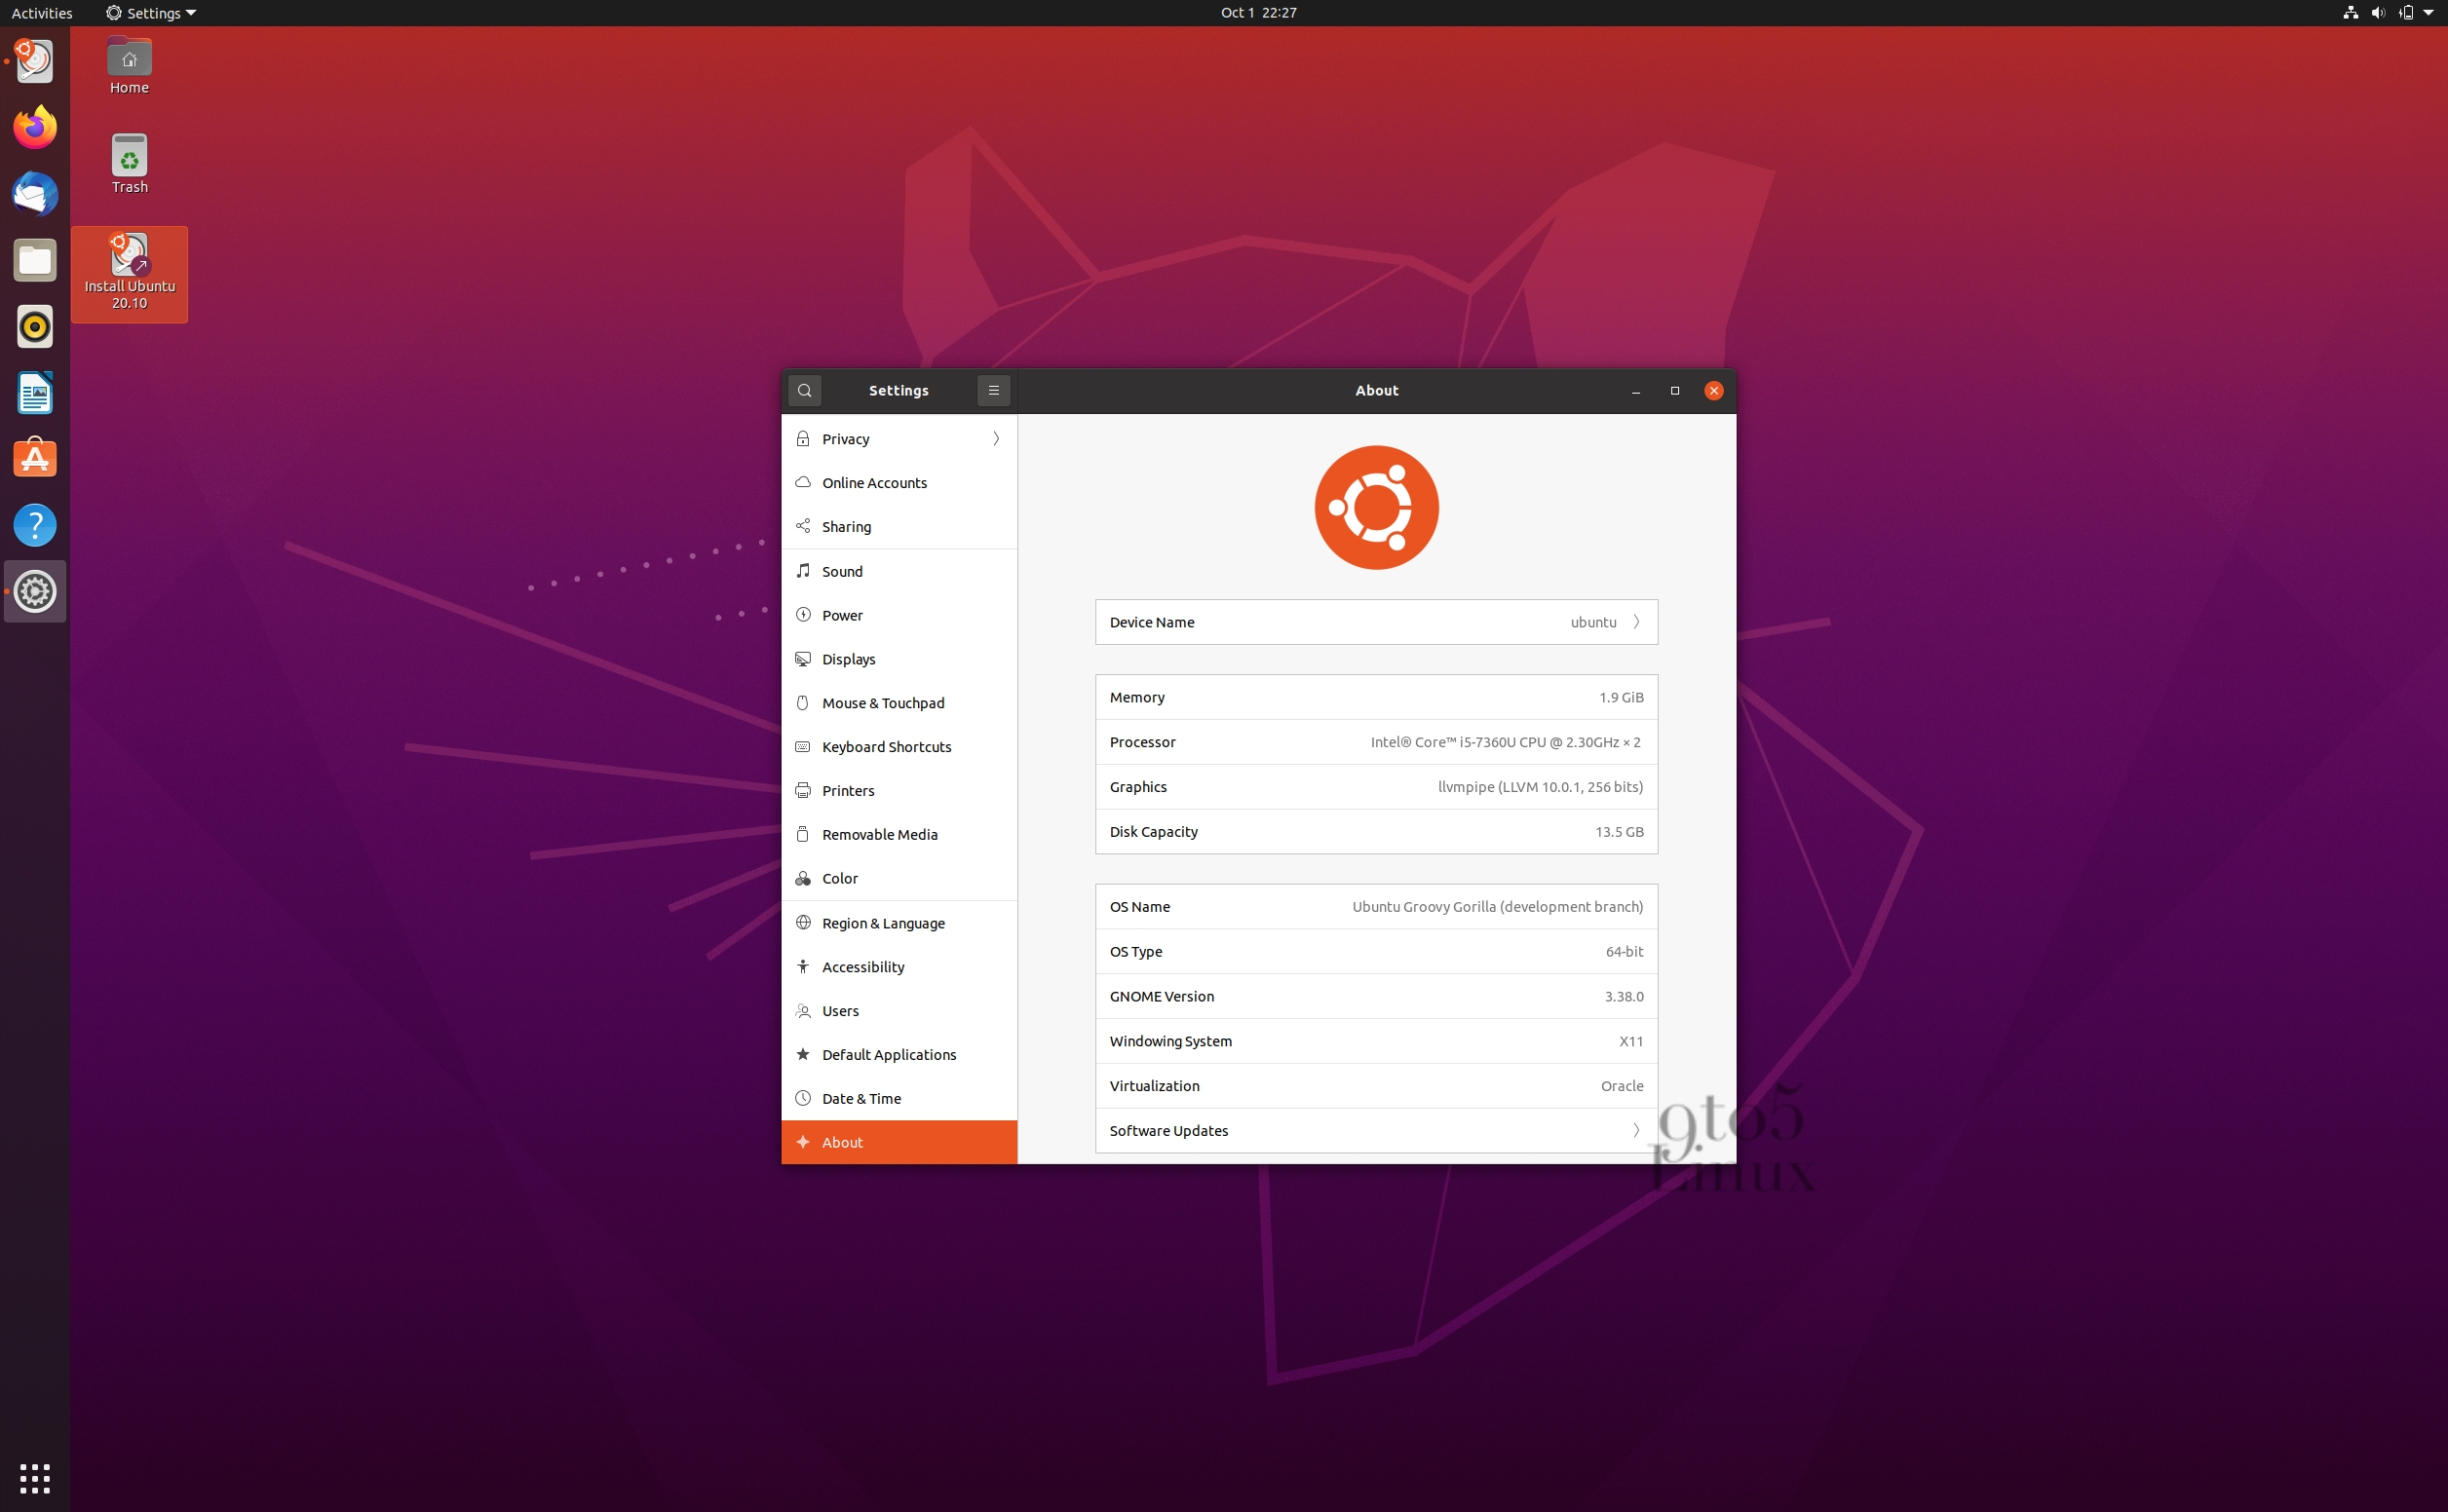 Ubuntu 20.10 (Groovy Gorilla) Beta Is Now Available for Download